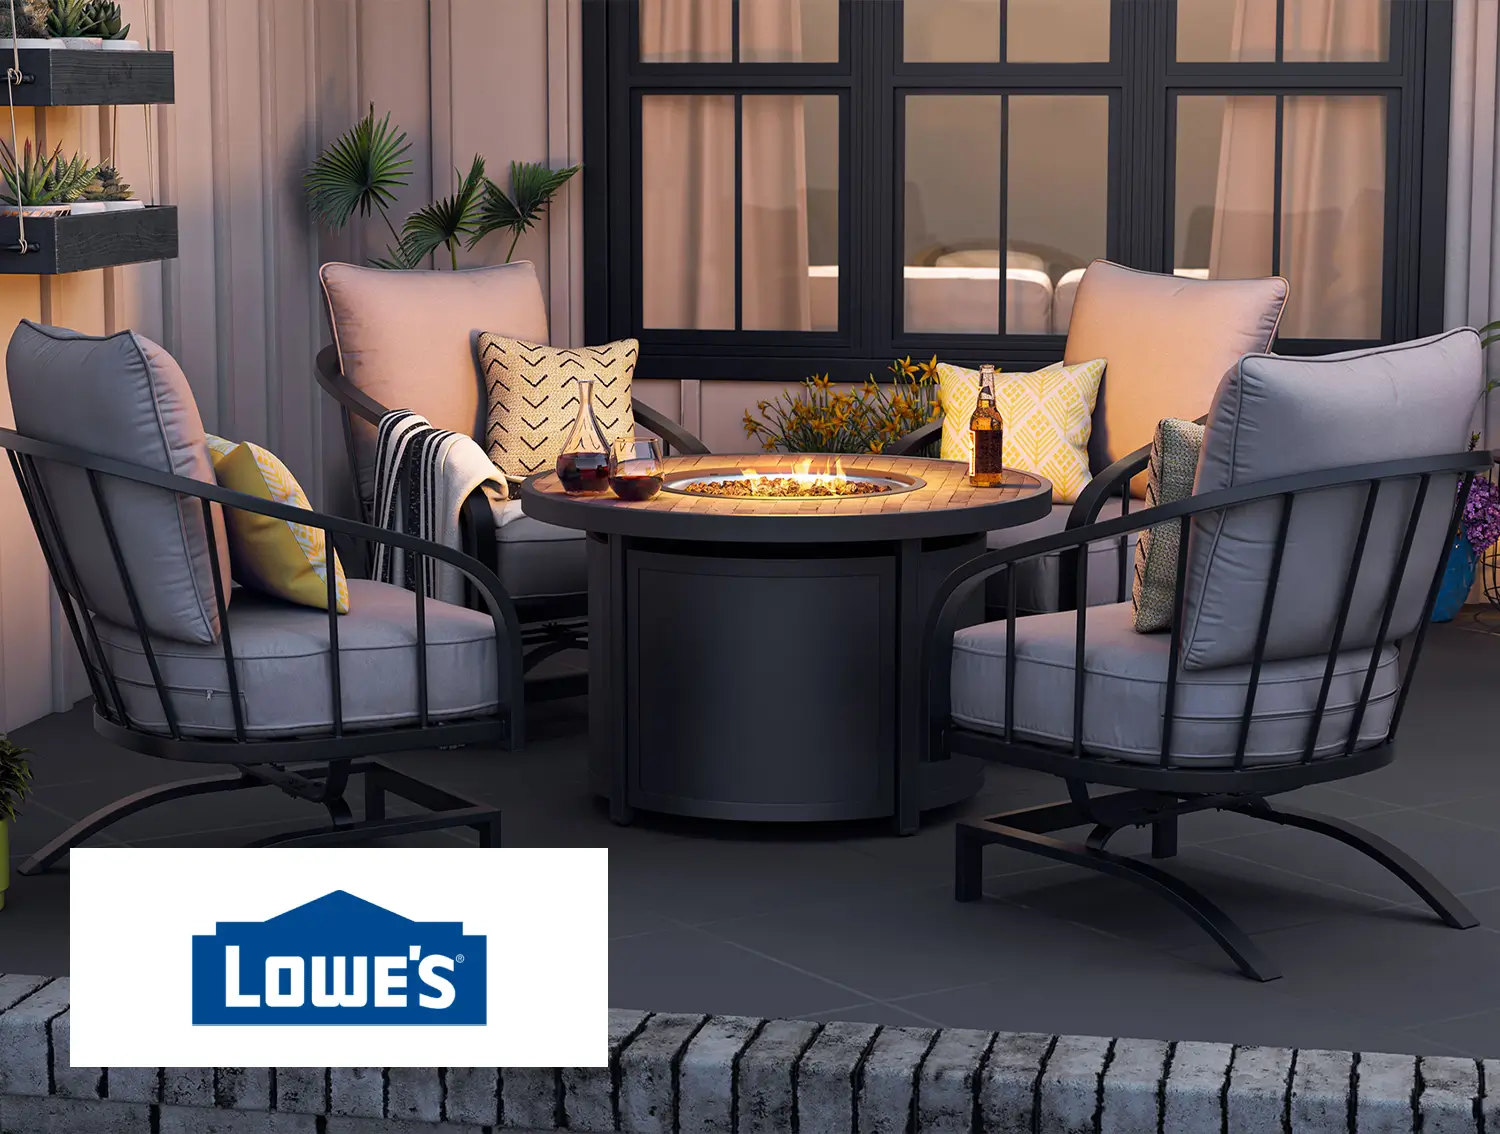 Lowe’s Overcomes Outdoor Shoot Hurdles with CGI & Virtual Content